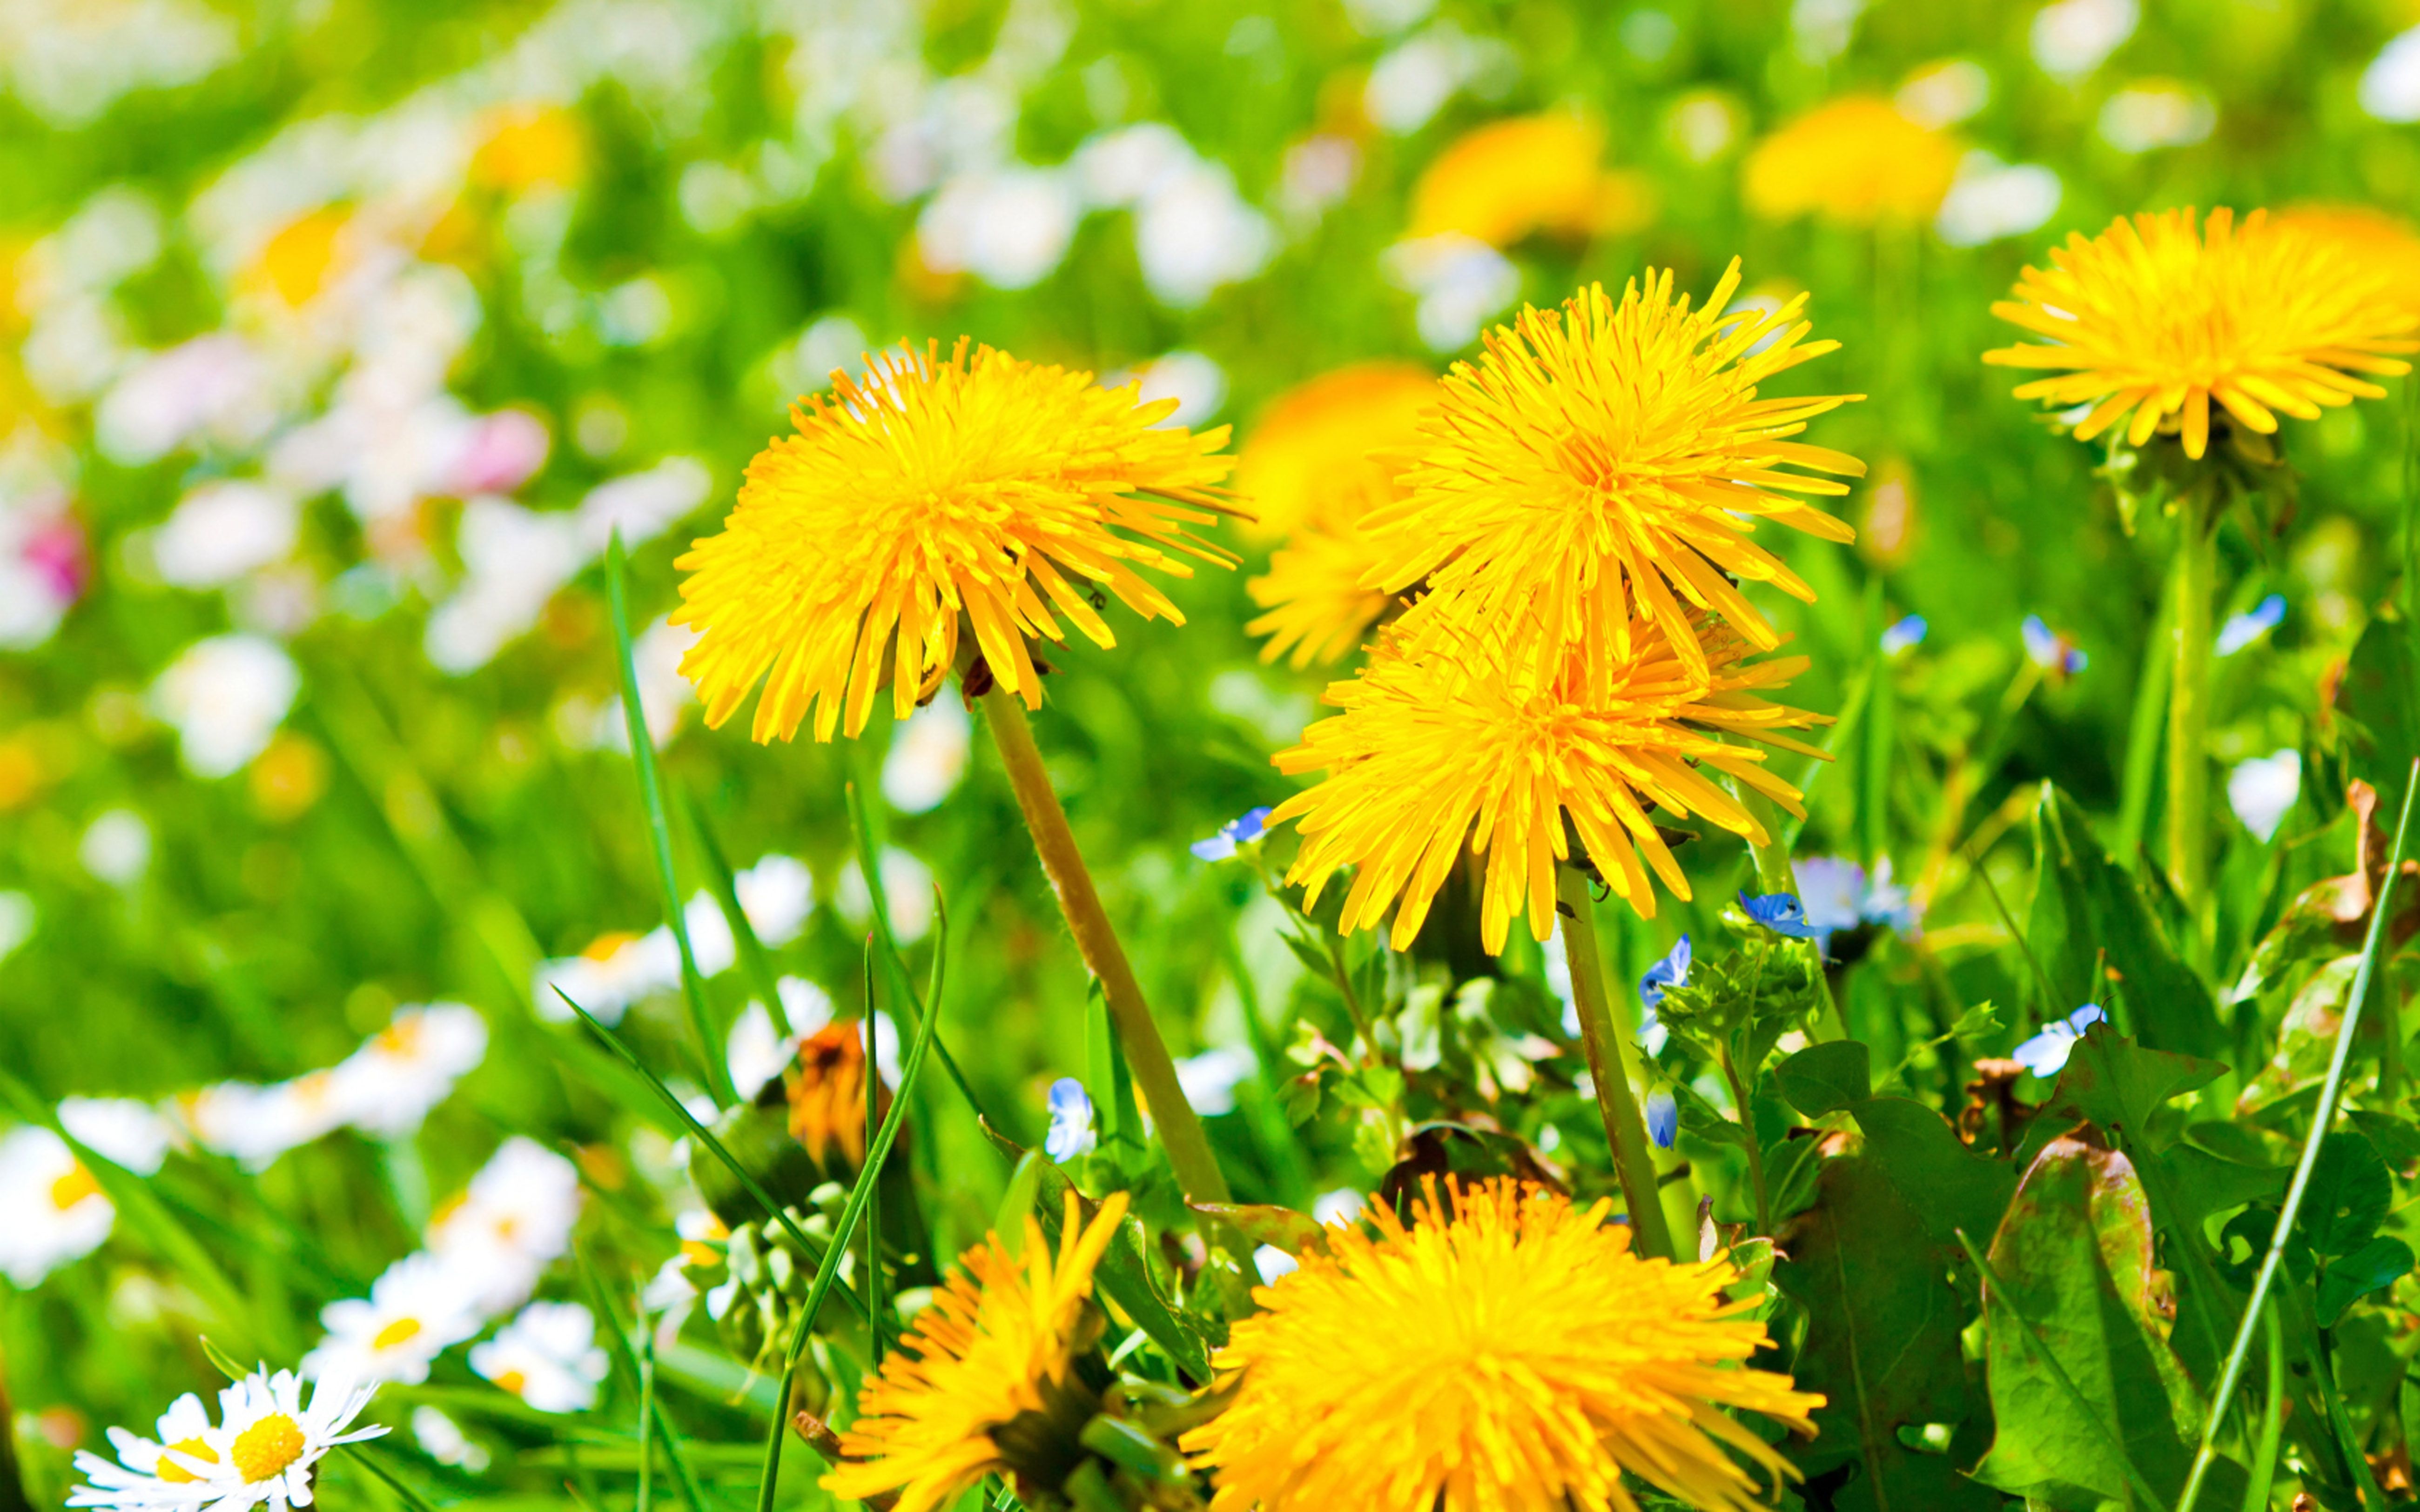 Dandelions With Daisies Beautiful Yellow Flowers Nature Summer HD Desktop Wallpaper For Tablets And Mobile Phones Free Download 5200x3250, Wallpaper13.com